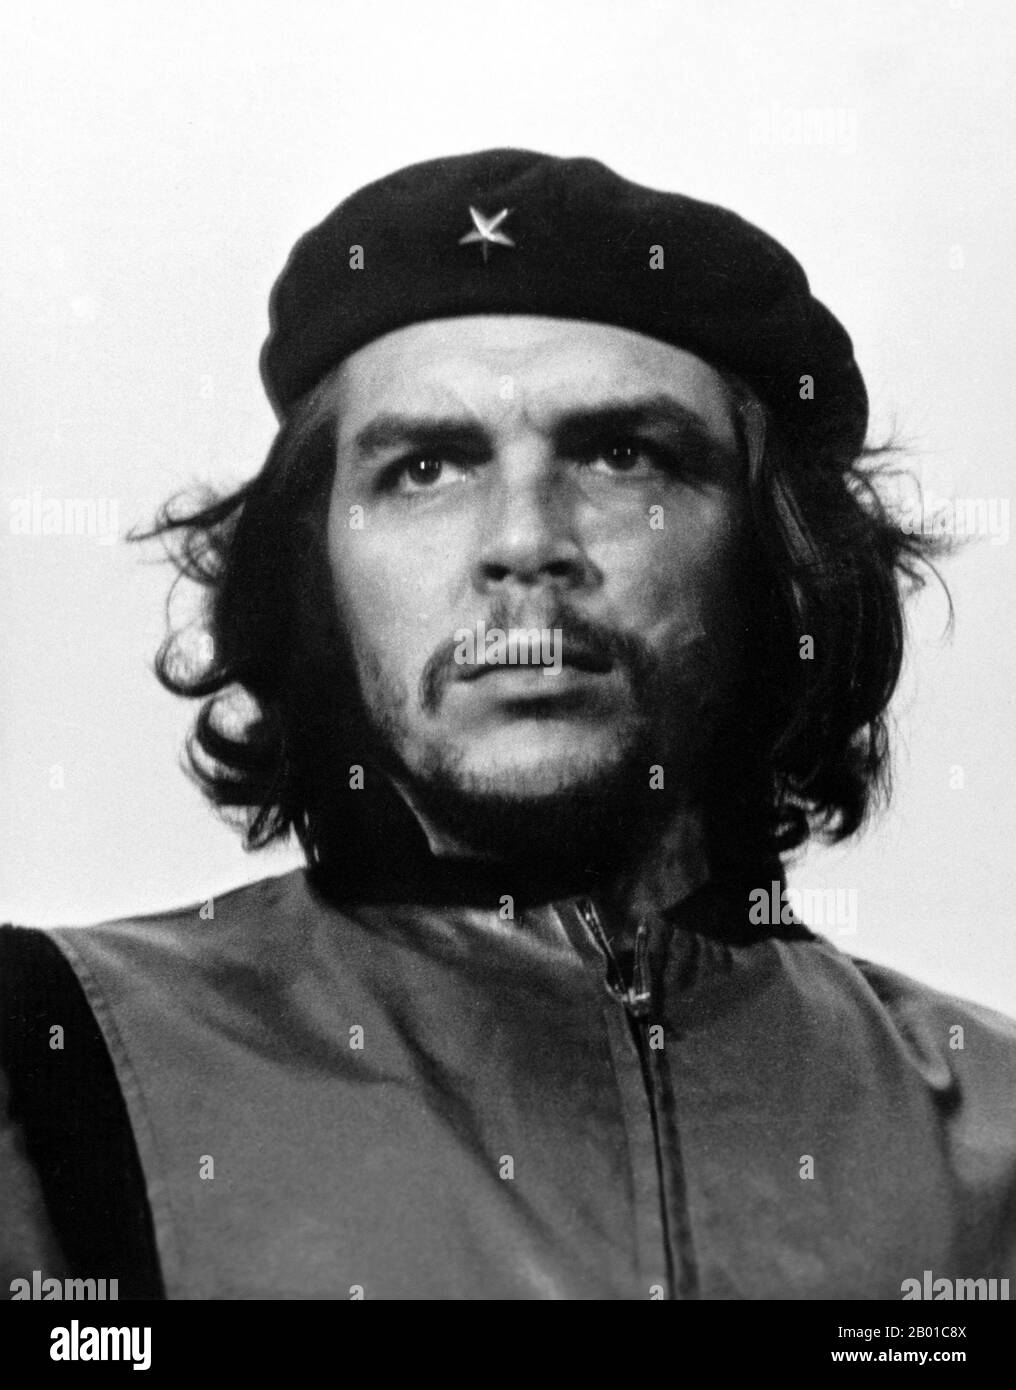 Cuba/Argentina: Ernesto 'Che' Guevara (14 June 1928 - 9 October 1967), commonly known as El Che or simply Che, Argentine Marxist revolutionary, physician, author, intellectual, guerrilla leader, diplomat and military theorist. Photo by Alberto Korda (14 September 1928 - 25 May 2001, public domain), 5 March 1960.  While living in Mexico City, Guevara met Raúl and Fidel Castro, joined their 26th of July Movement, and sailed to Cuba aboard the yacht, Granma, with the intention of overthrowing U.S.-backed Cuban dictator Fulgencio Batista. Guevara soon rose to prominence among the insurgents. Stock Photo